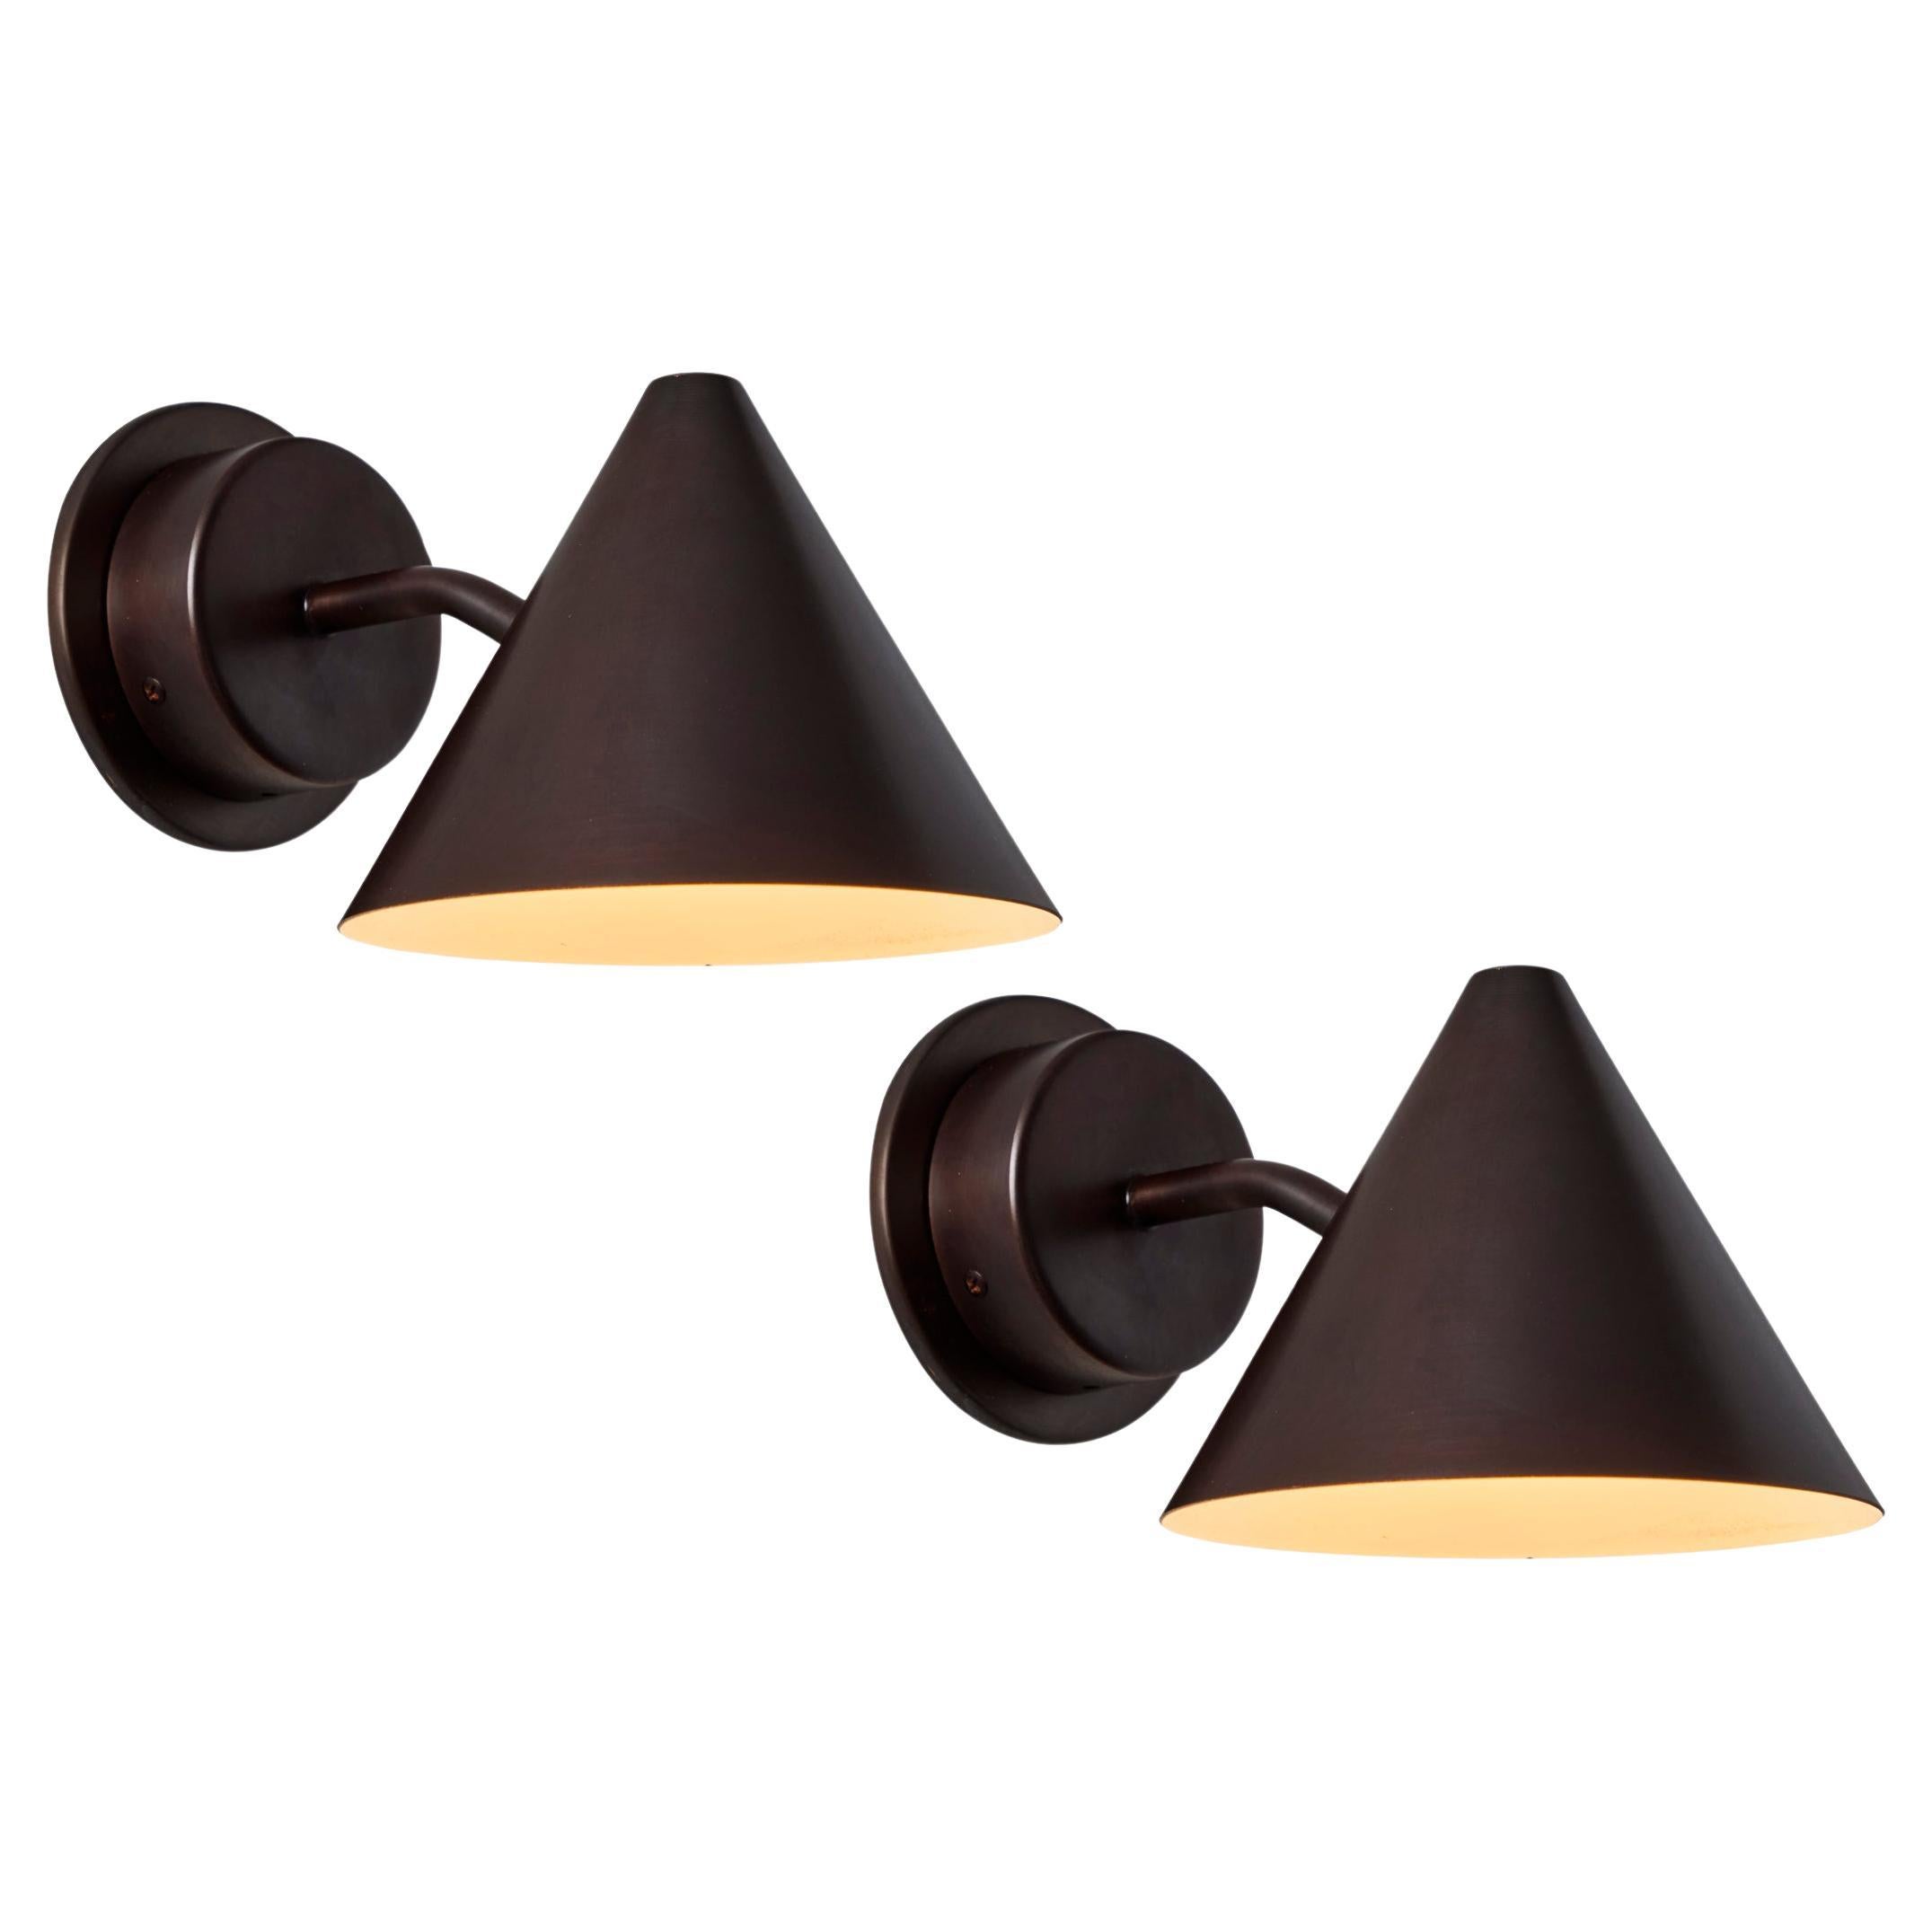 Pair of Hans-Agne Jakobsson 'Mini-Tratten' Dark Brown Patinated Outdoor Sconces